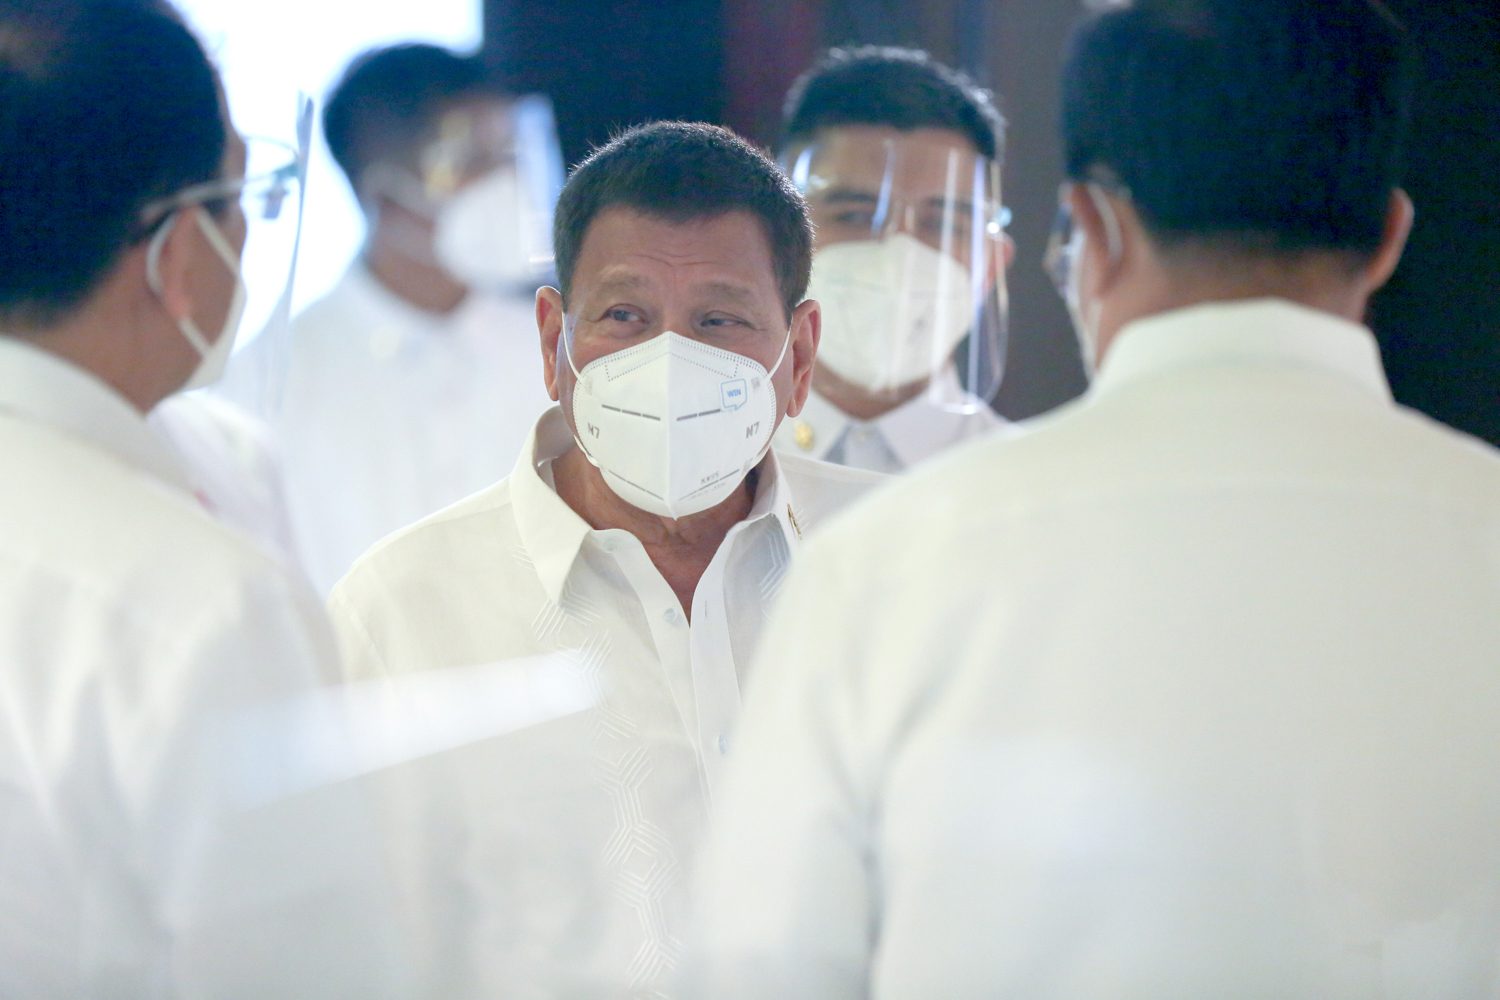 Change of mind: Duterte now willing to get COVID-19 vaccine in public